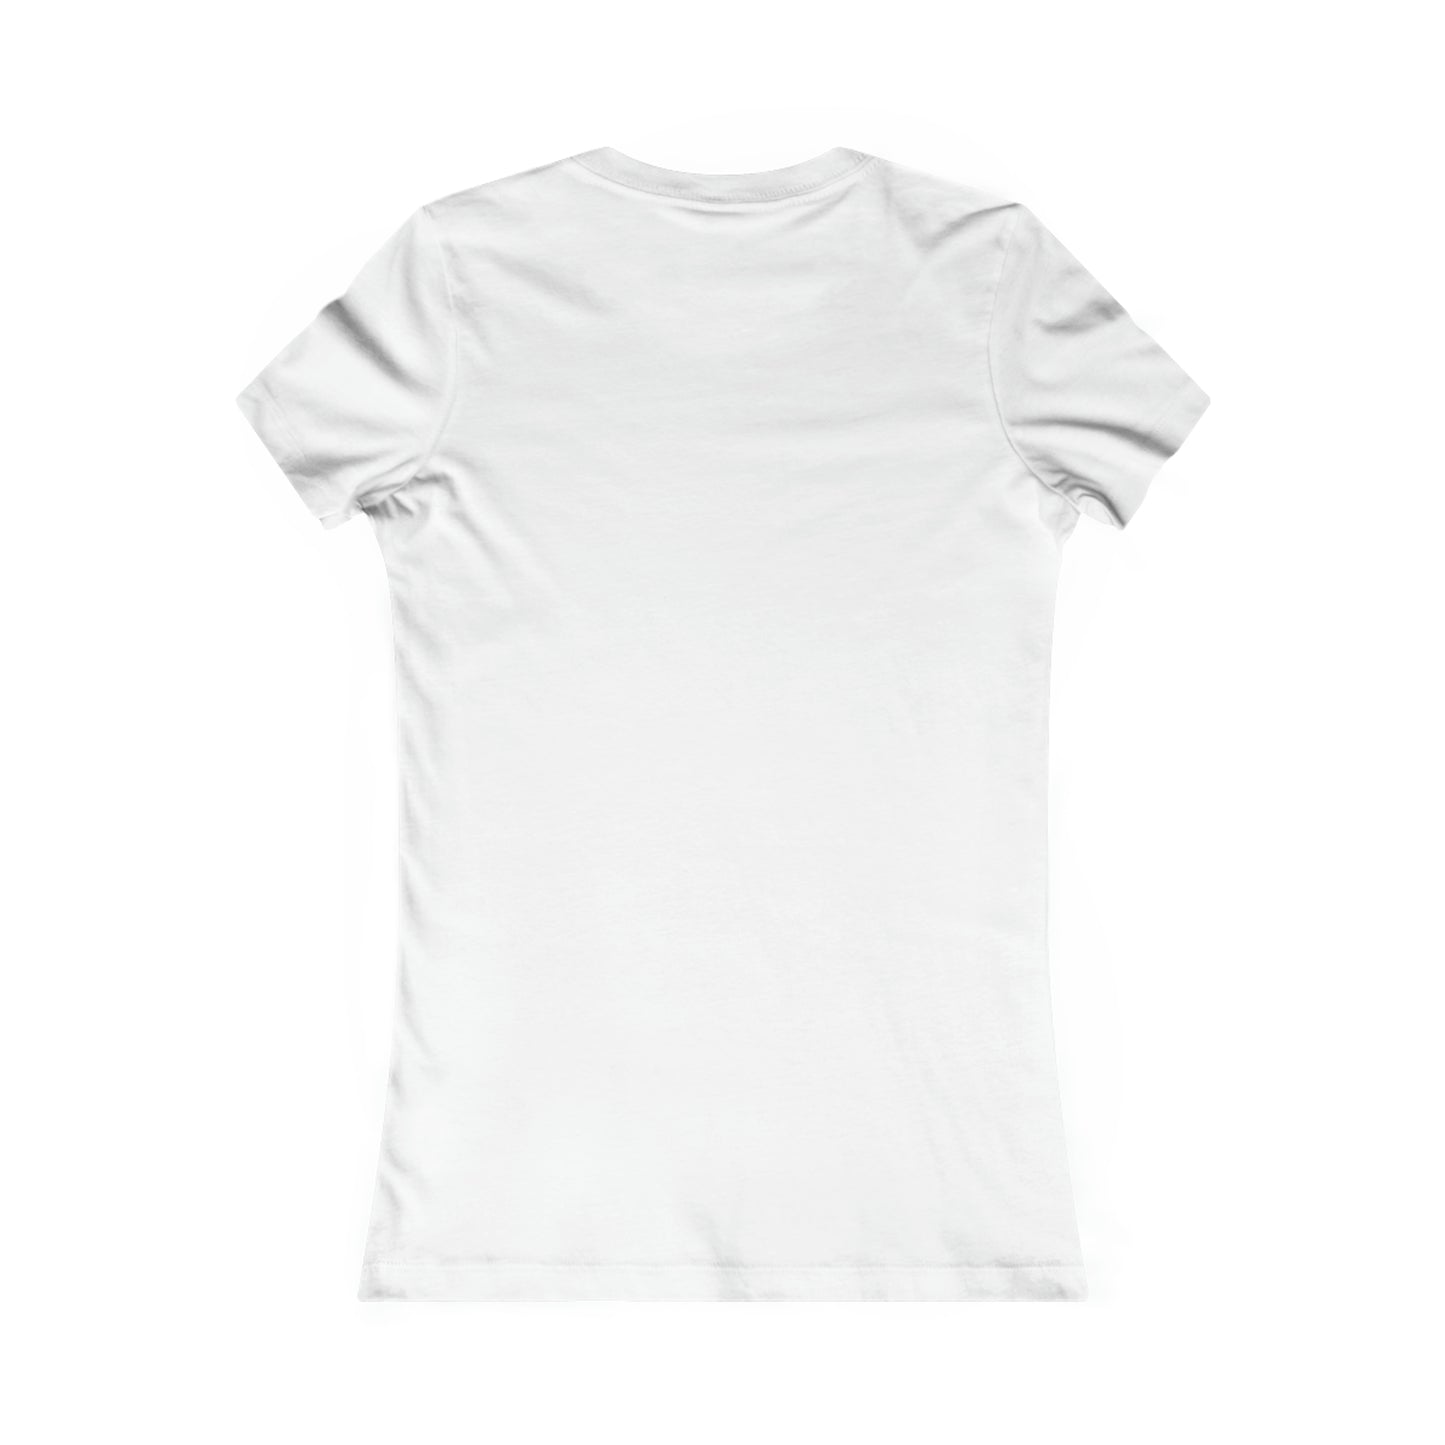 Women's Special Edition "Circle Of Wine" Slim Fit Black&White Tee